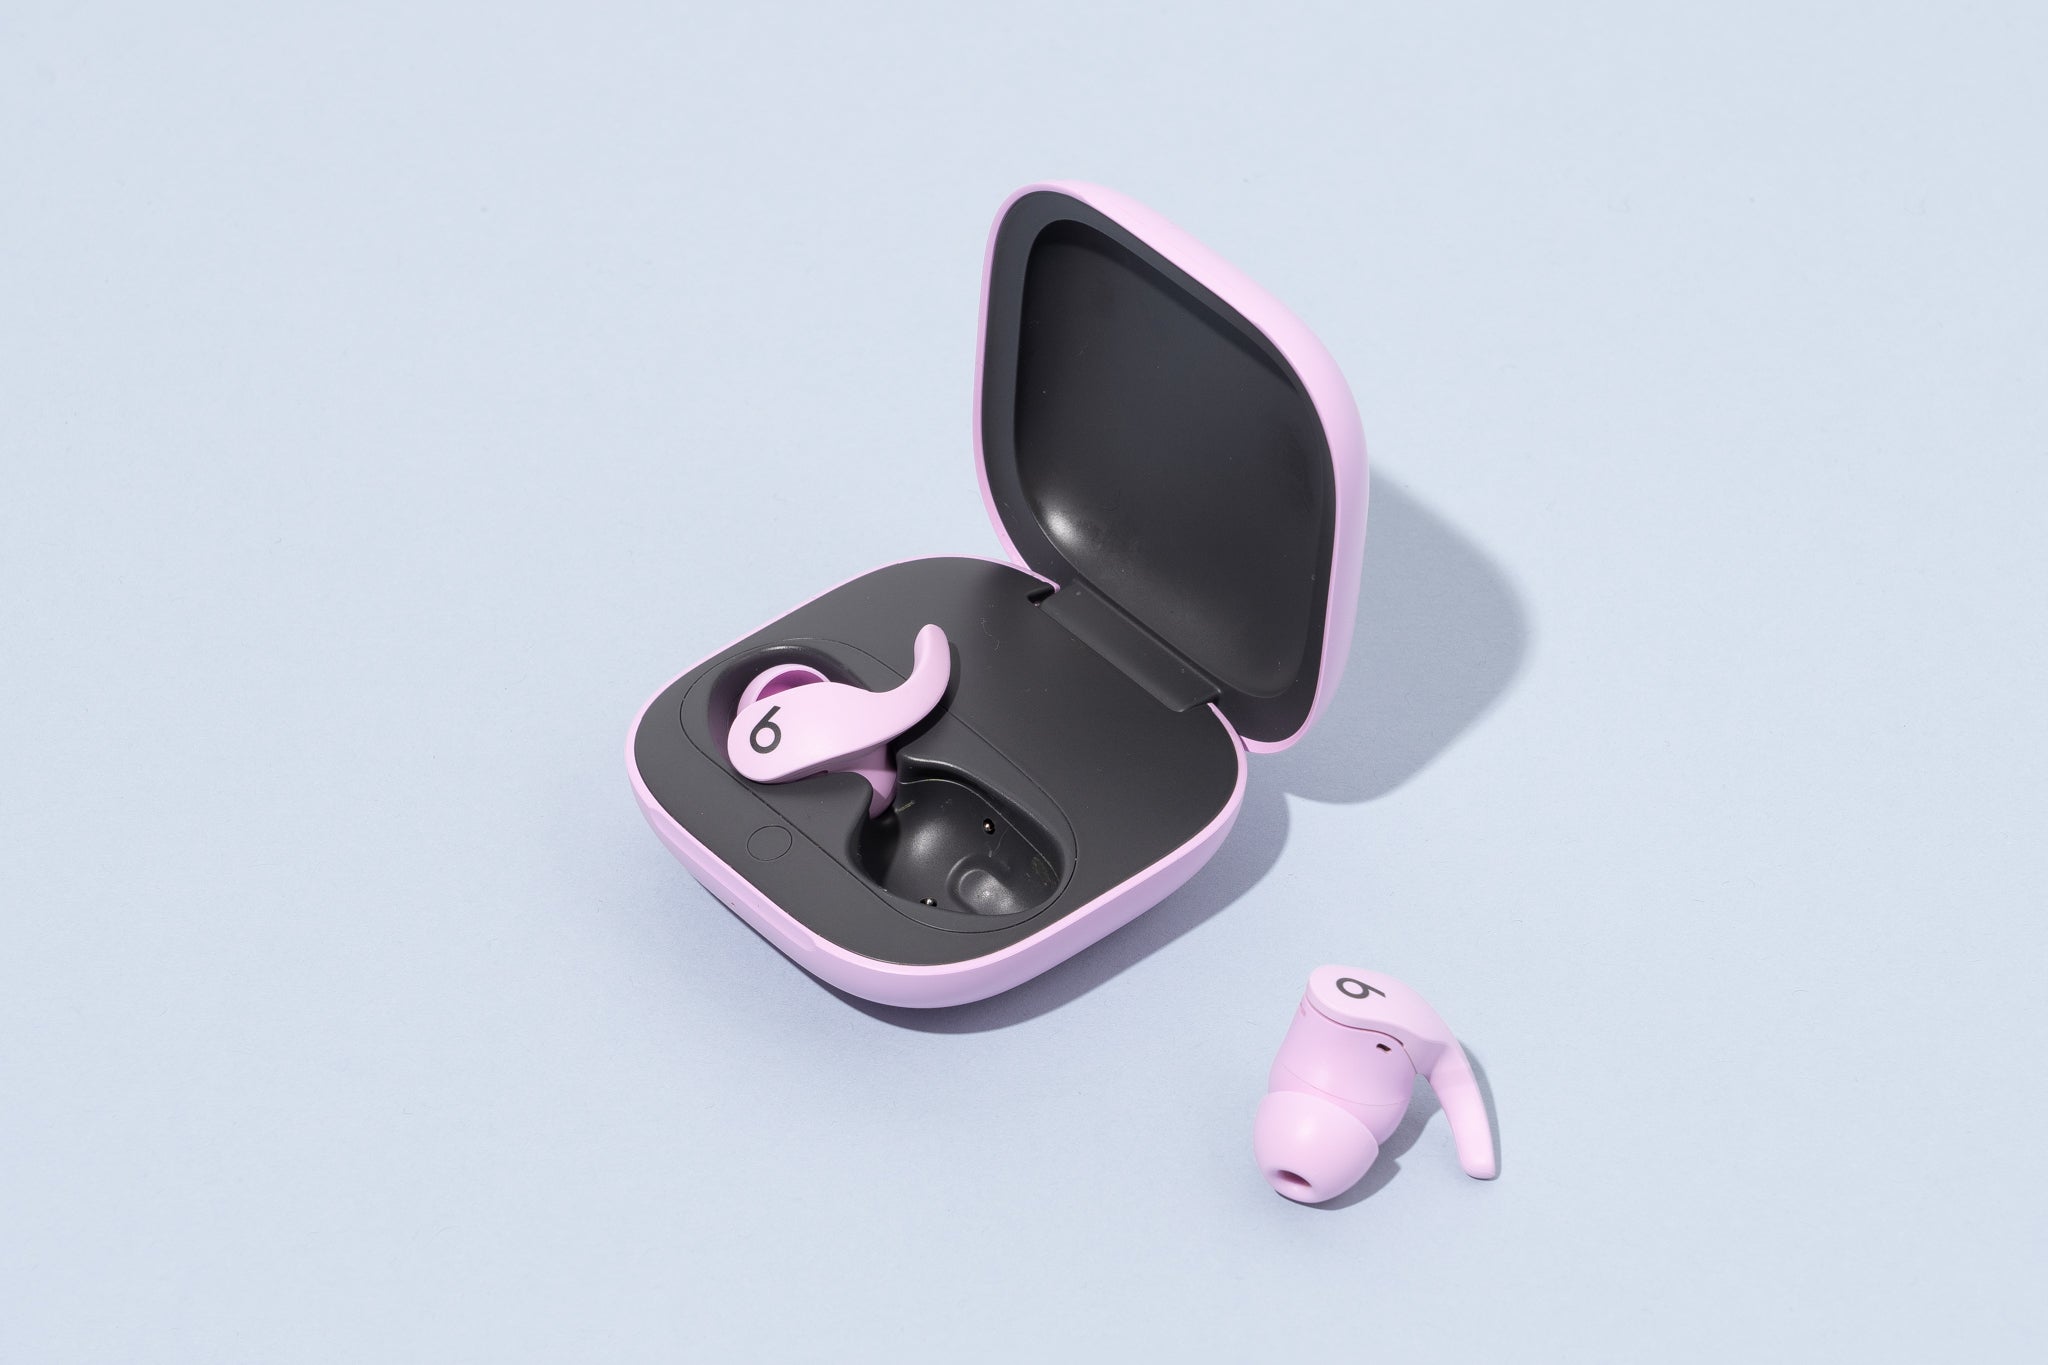 where-is-the-microphone-on-wireless-earbuds